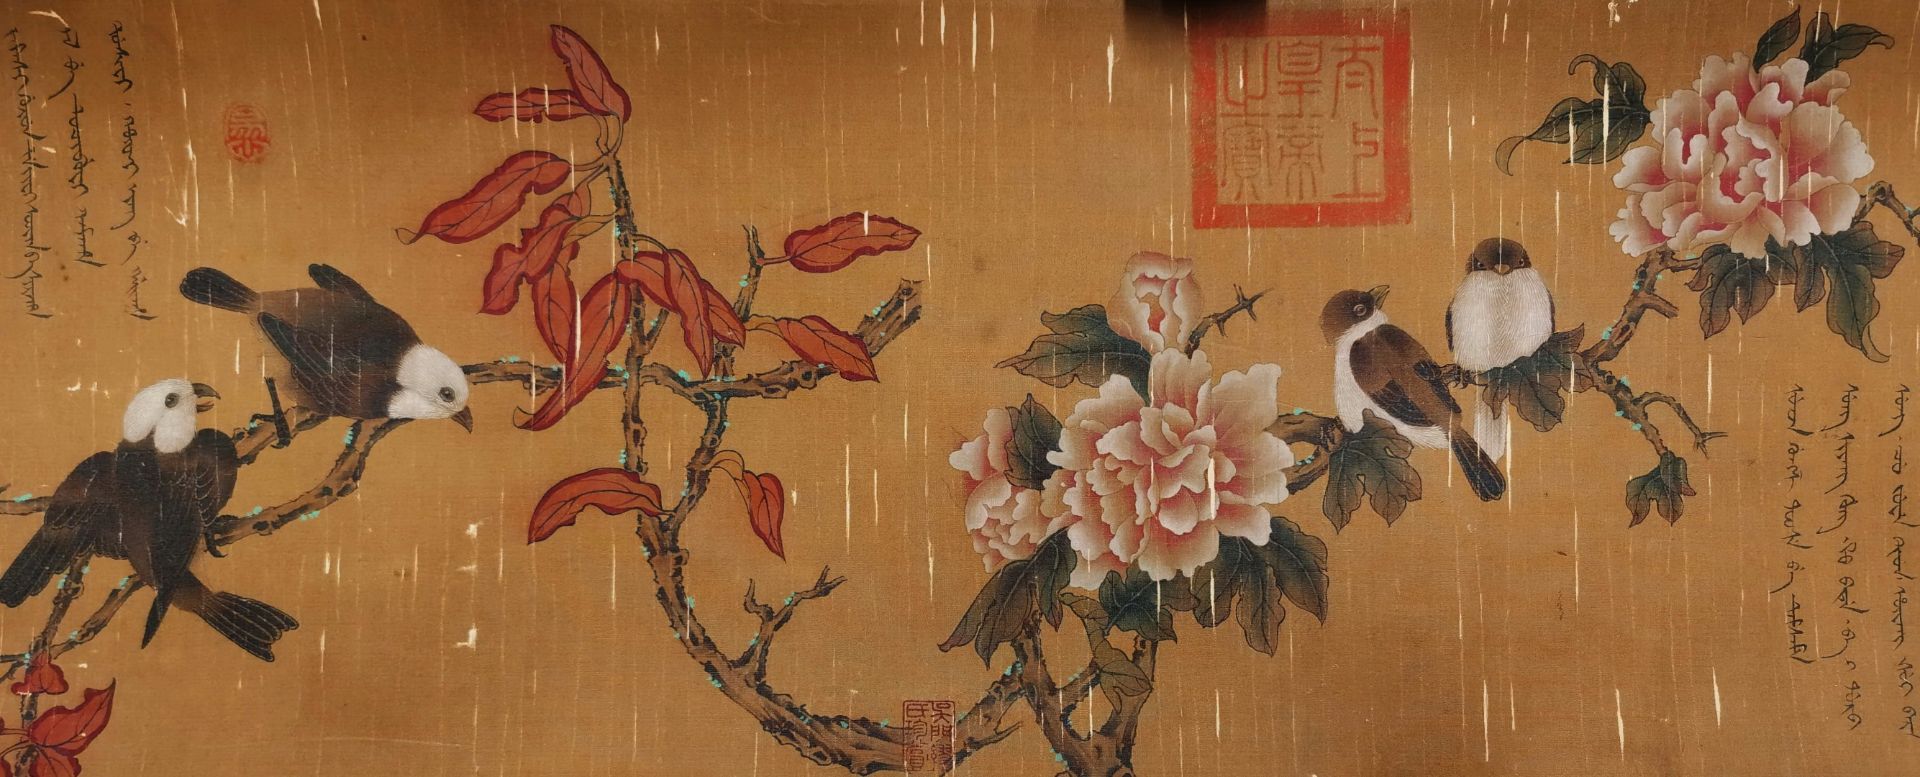 A Chinese Hand Scroll Painting By Jiang Tingxi - Image 4 of 13